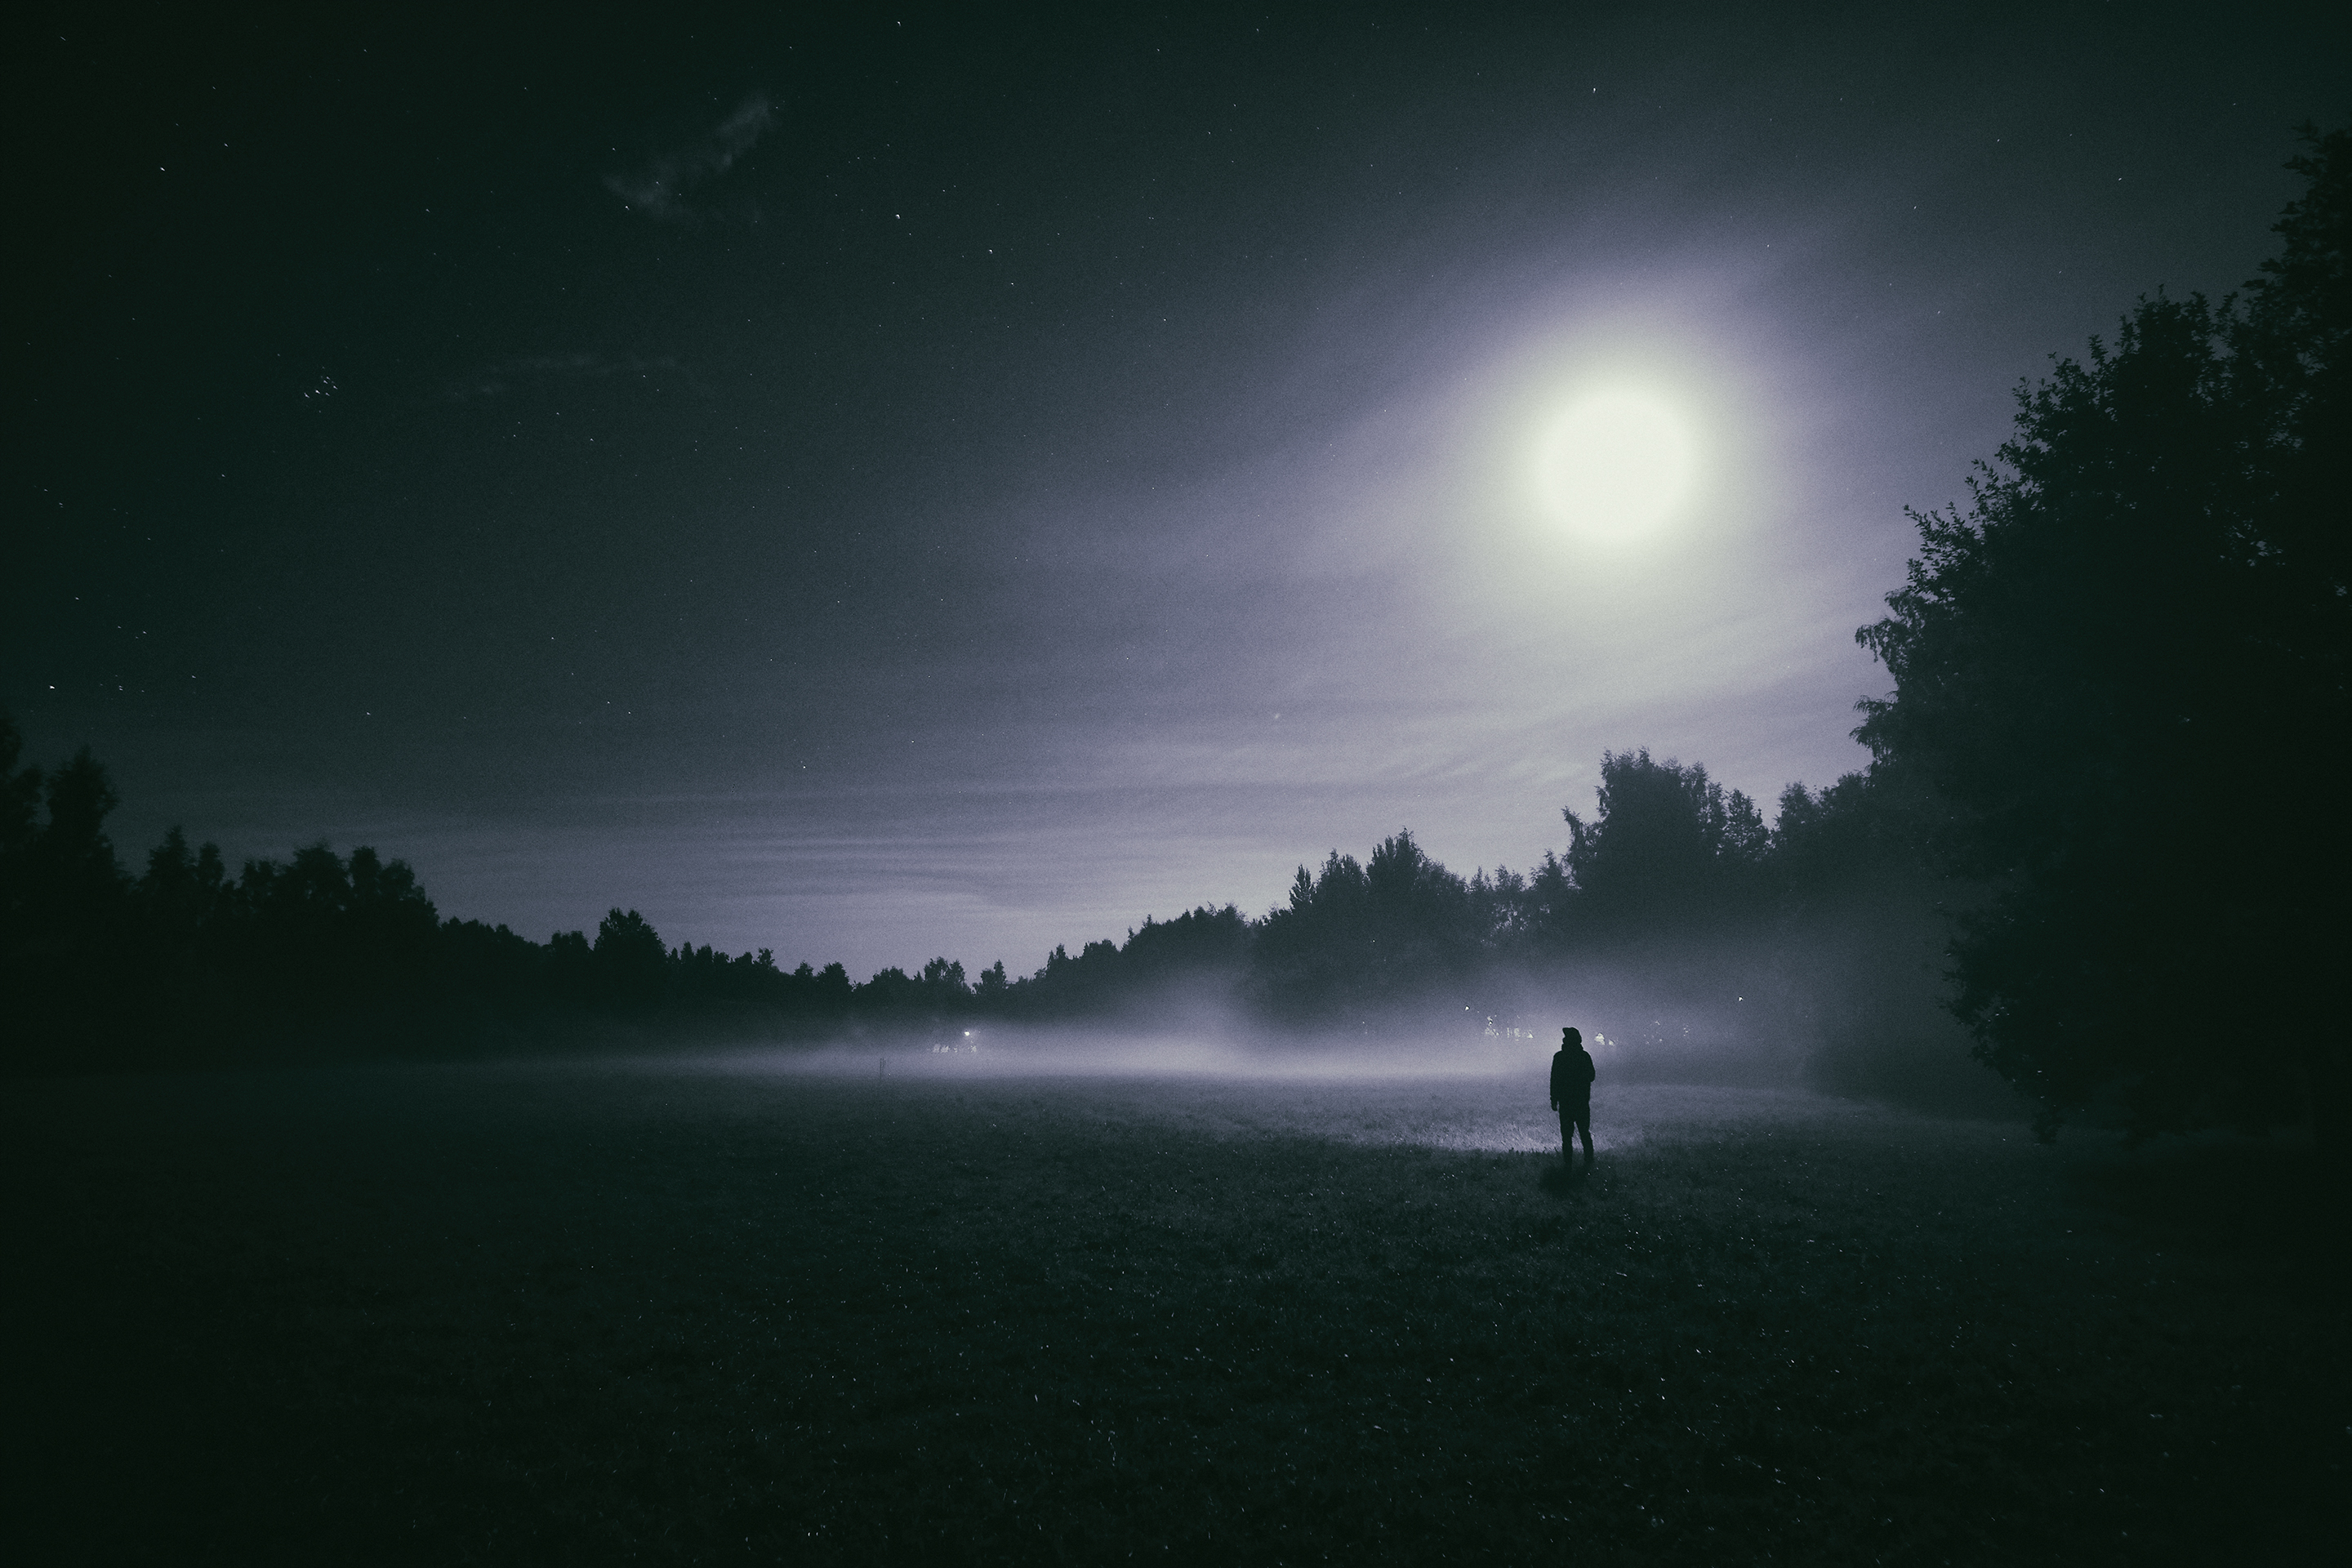 General 2880x1920 landscape nature trees forest field Moon moon rays moonlight standing mist night alone low light